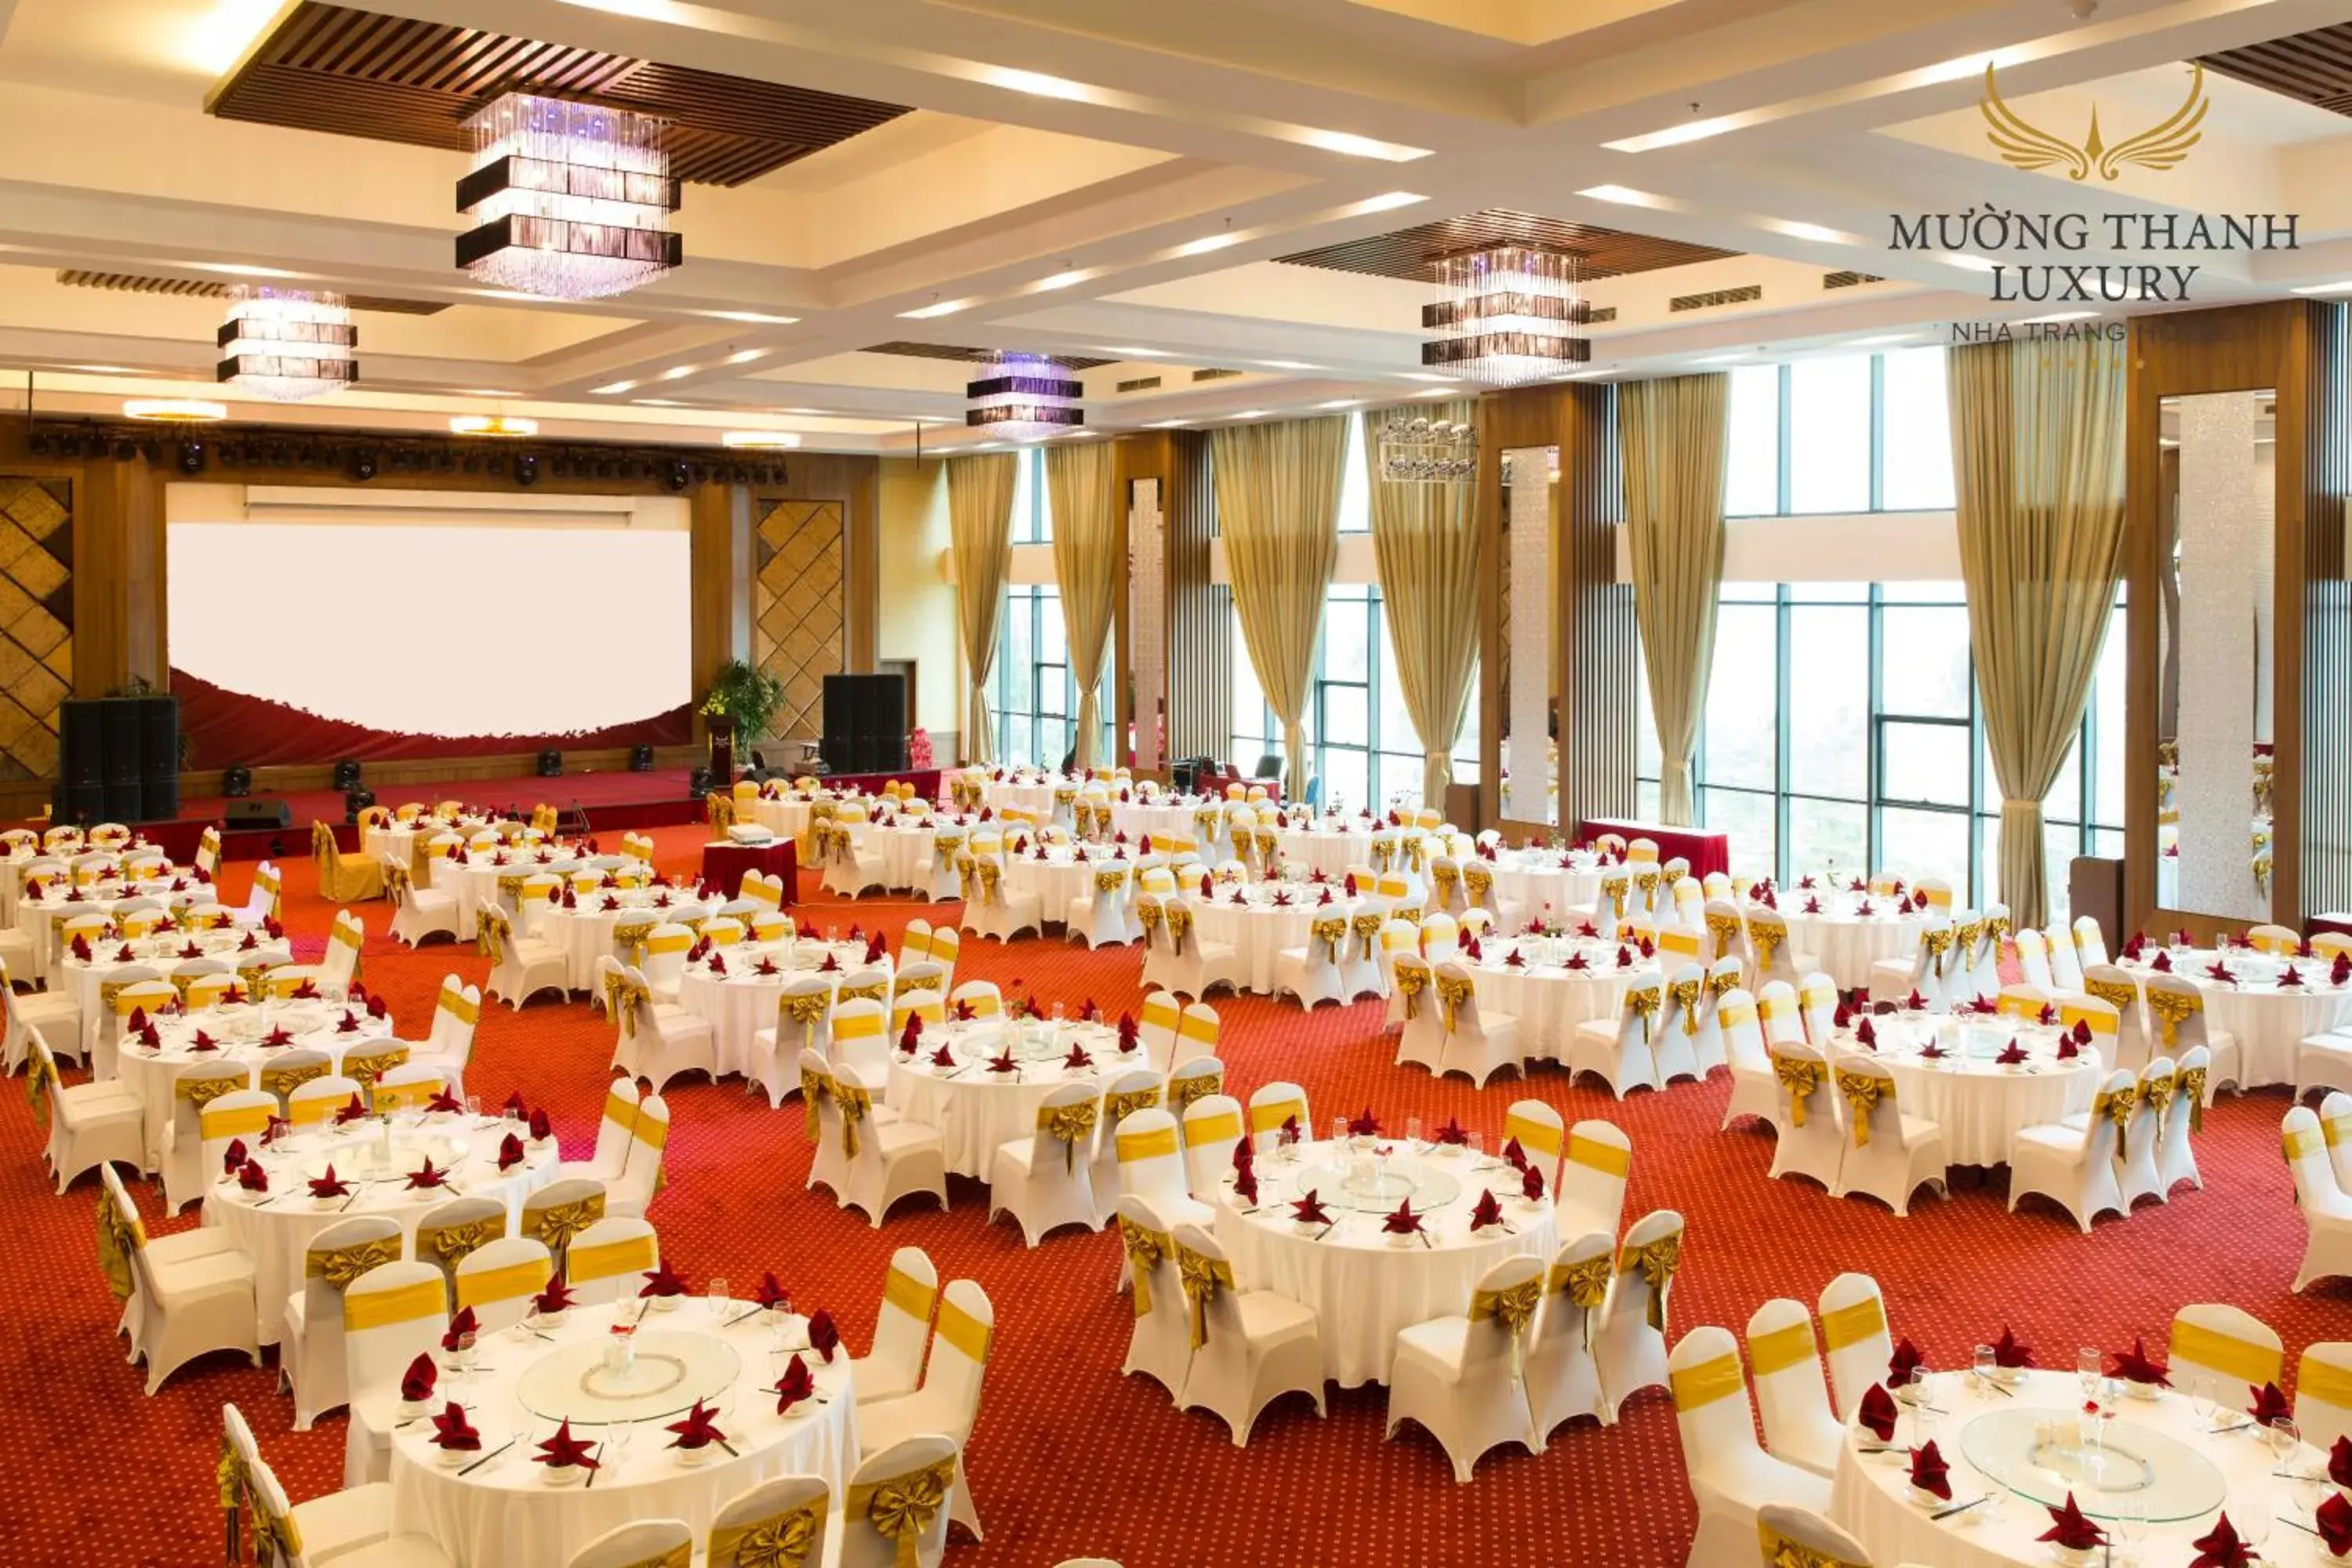 Property building, Banquet Facilities in Muong Thanh Luxury Nha Trang Hotel